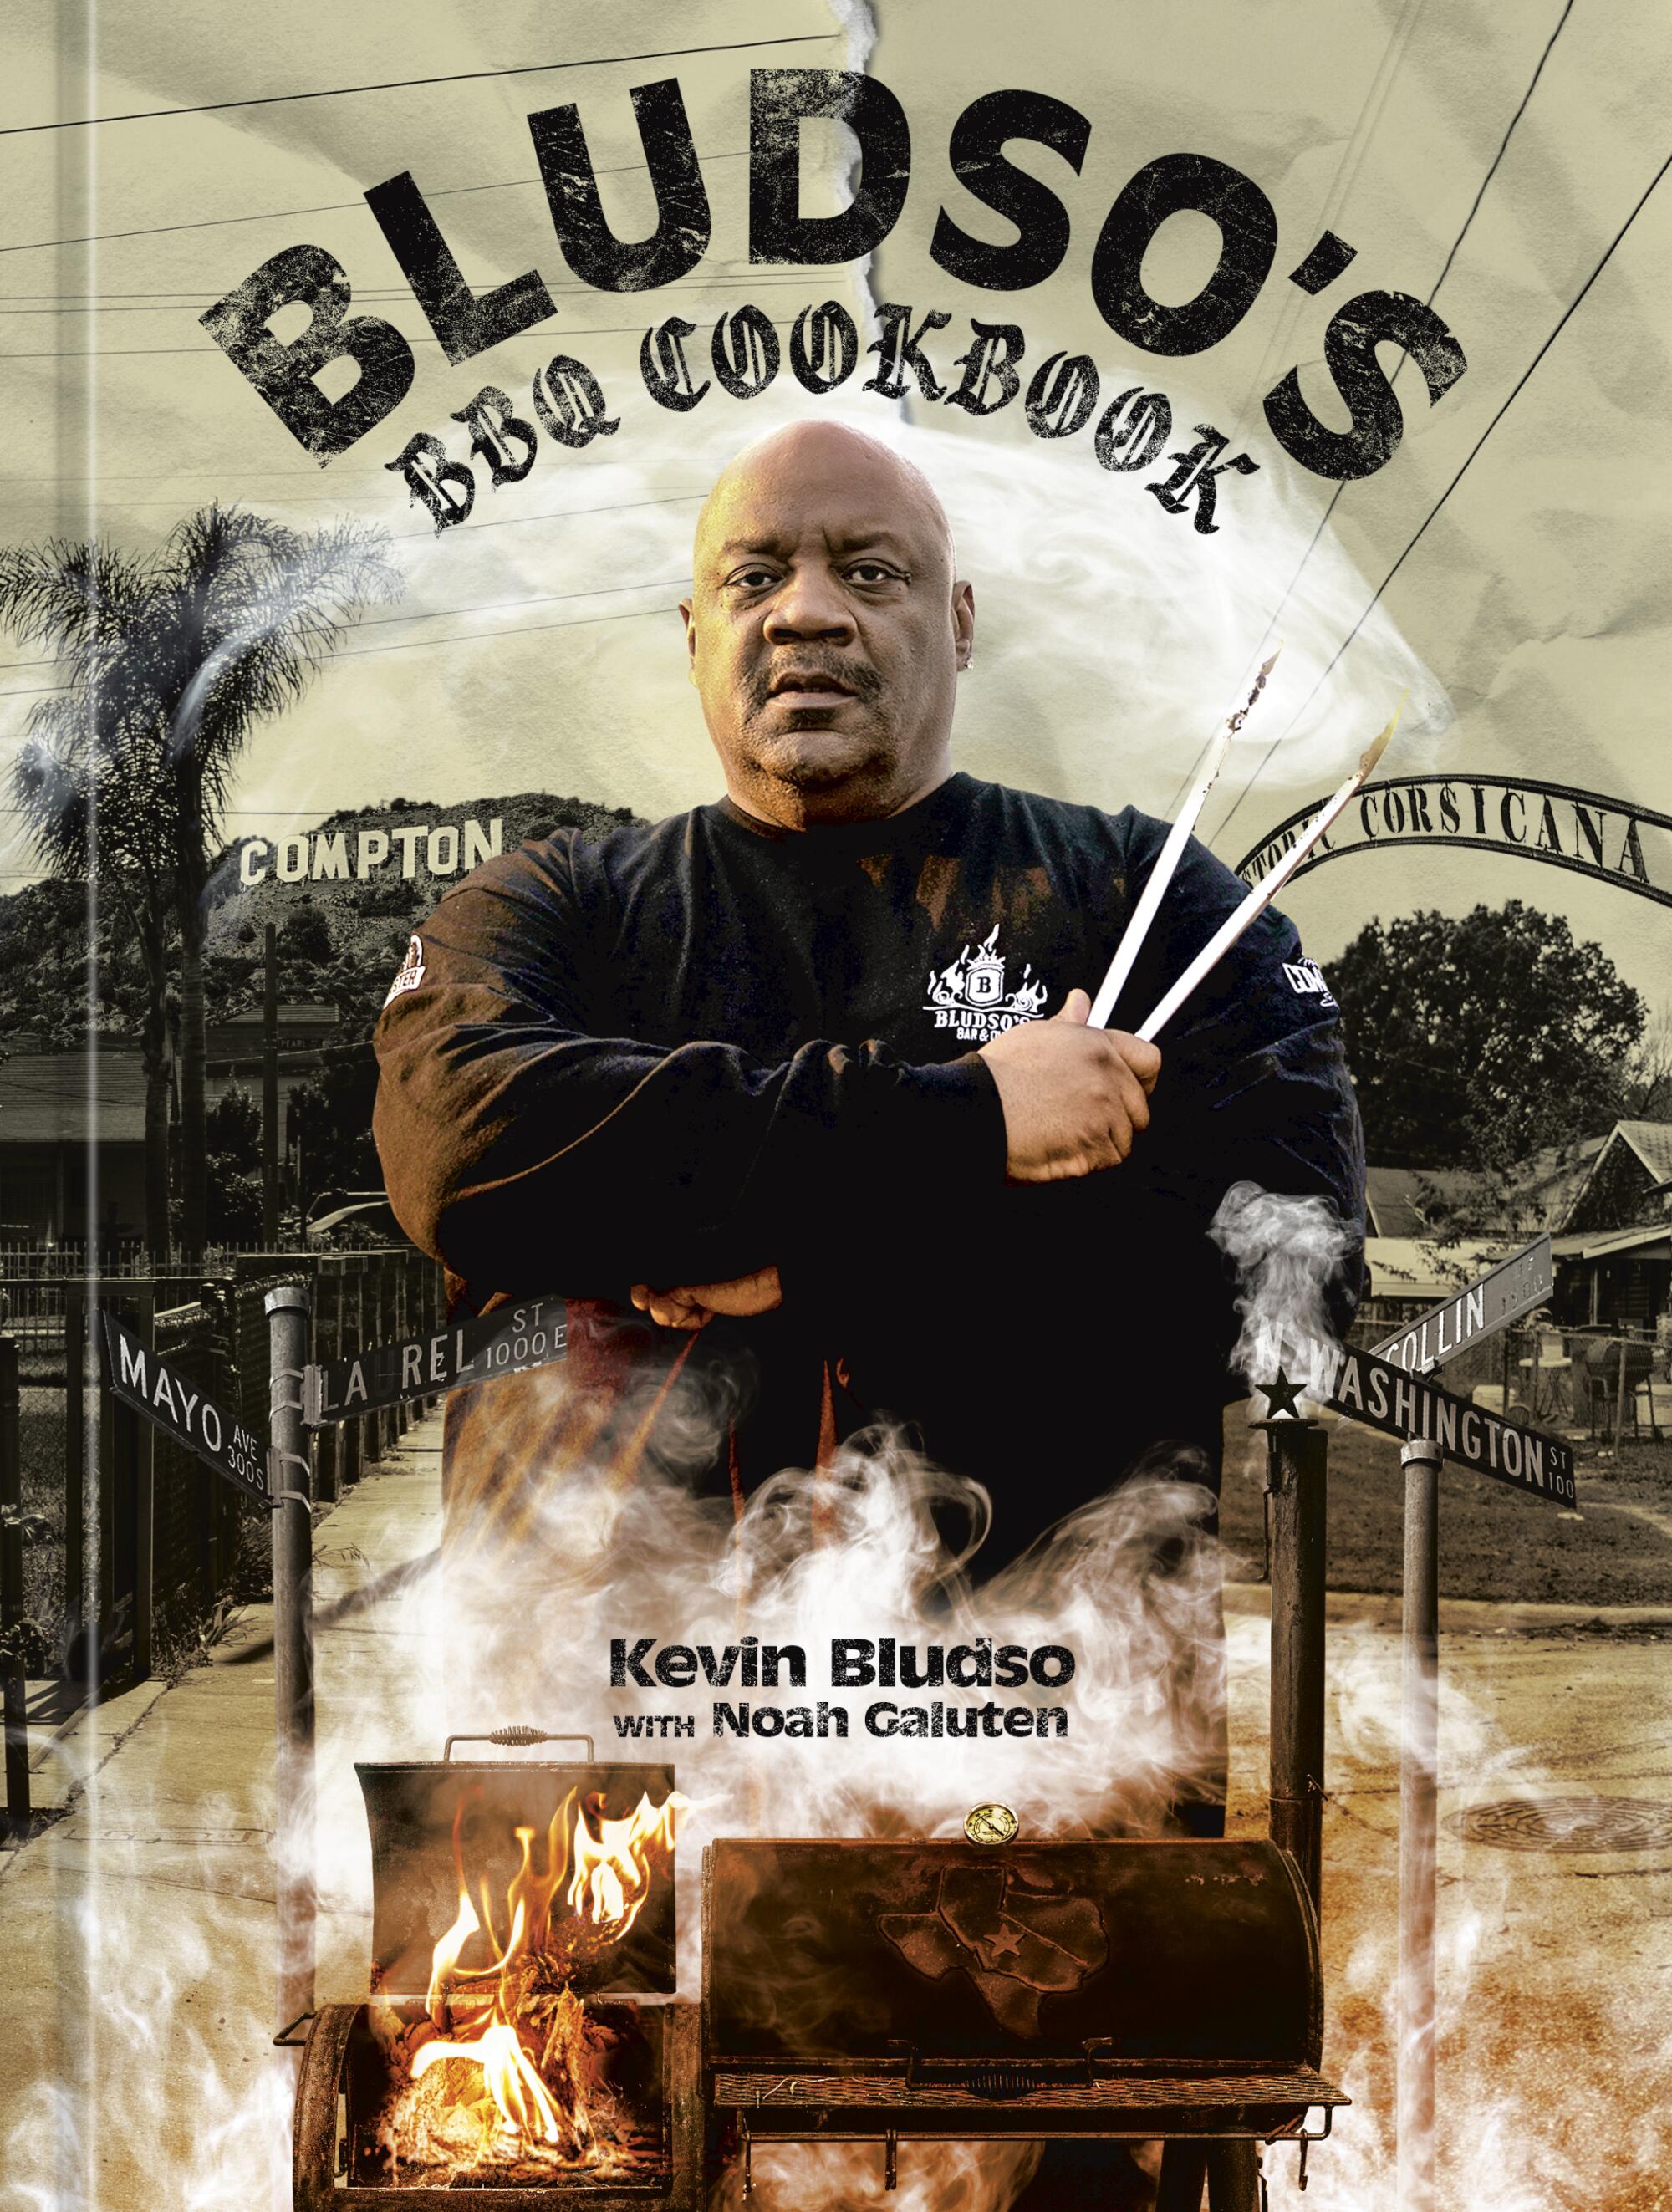 "Bludso's BBQ Cookbook" by Kevin Bludso with Noah Galuten